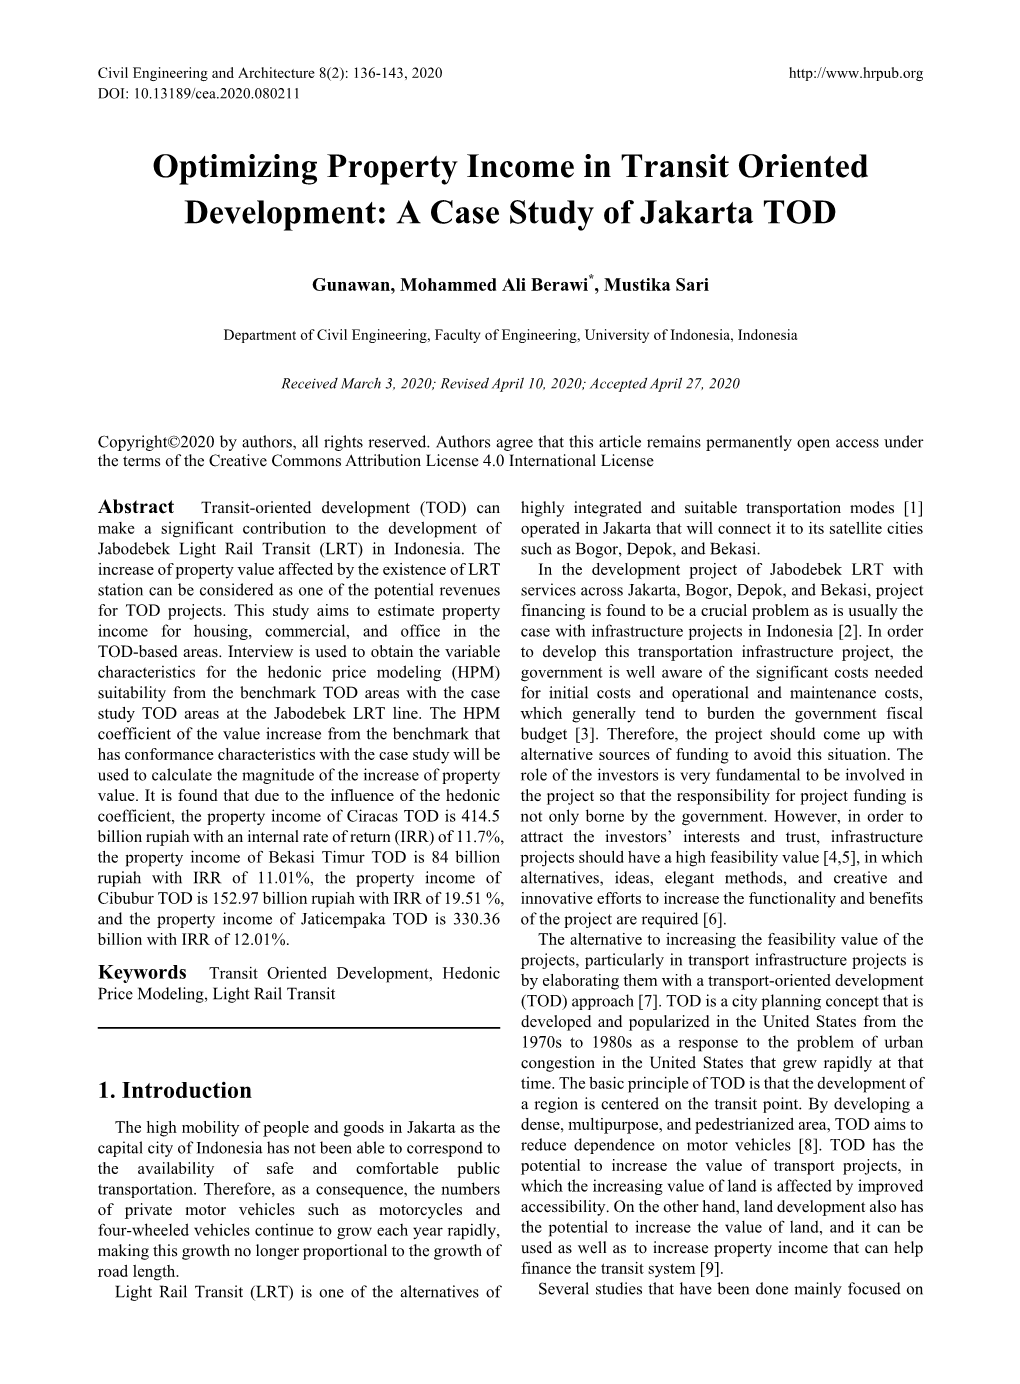 Optimizing Property Income in Transit Oriented Development: a Case Study of Jakarta TOD